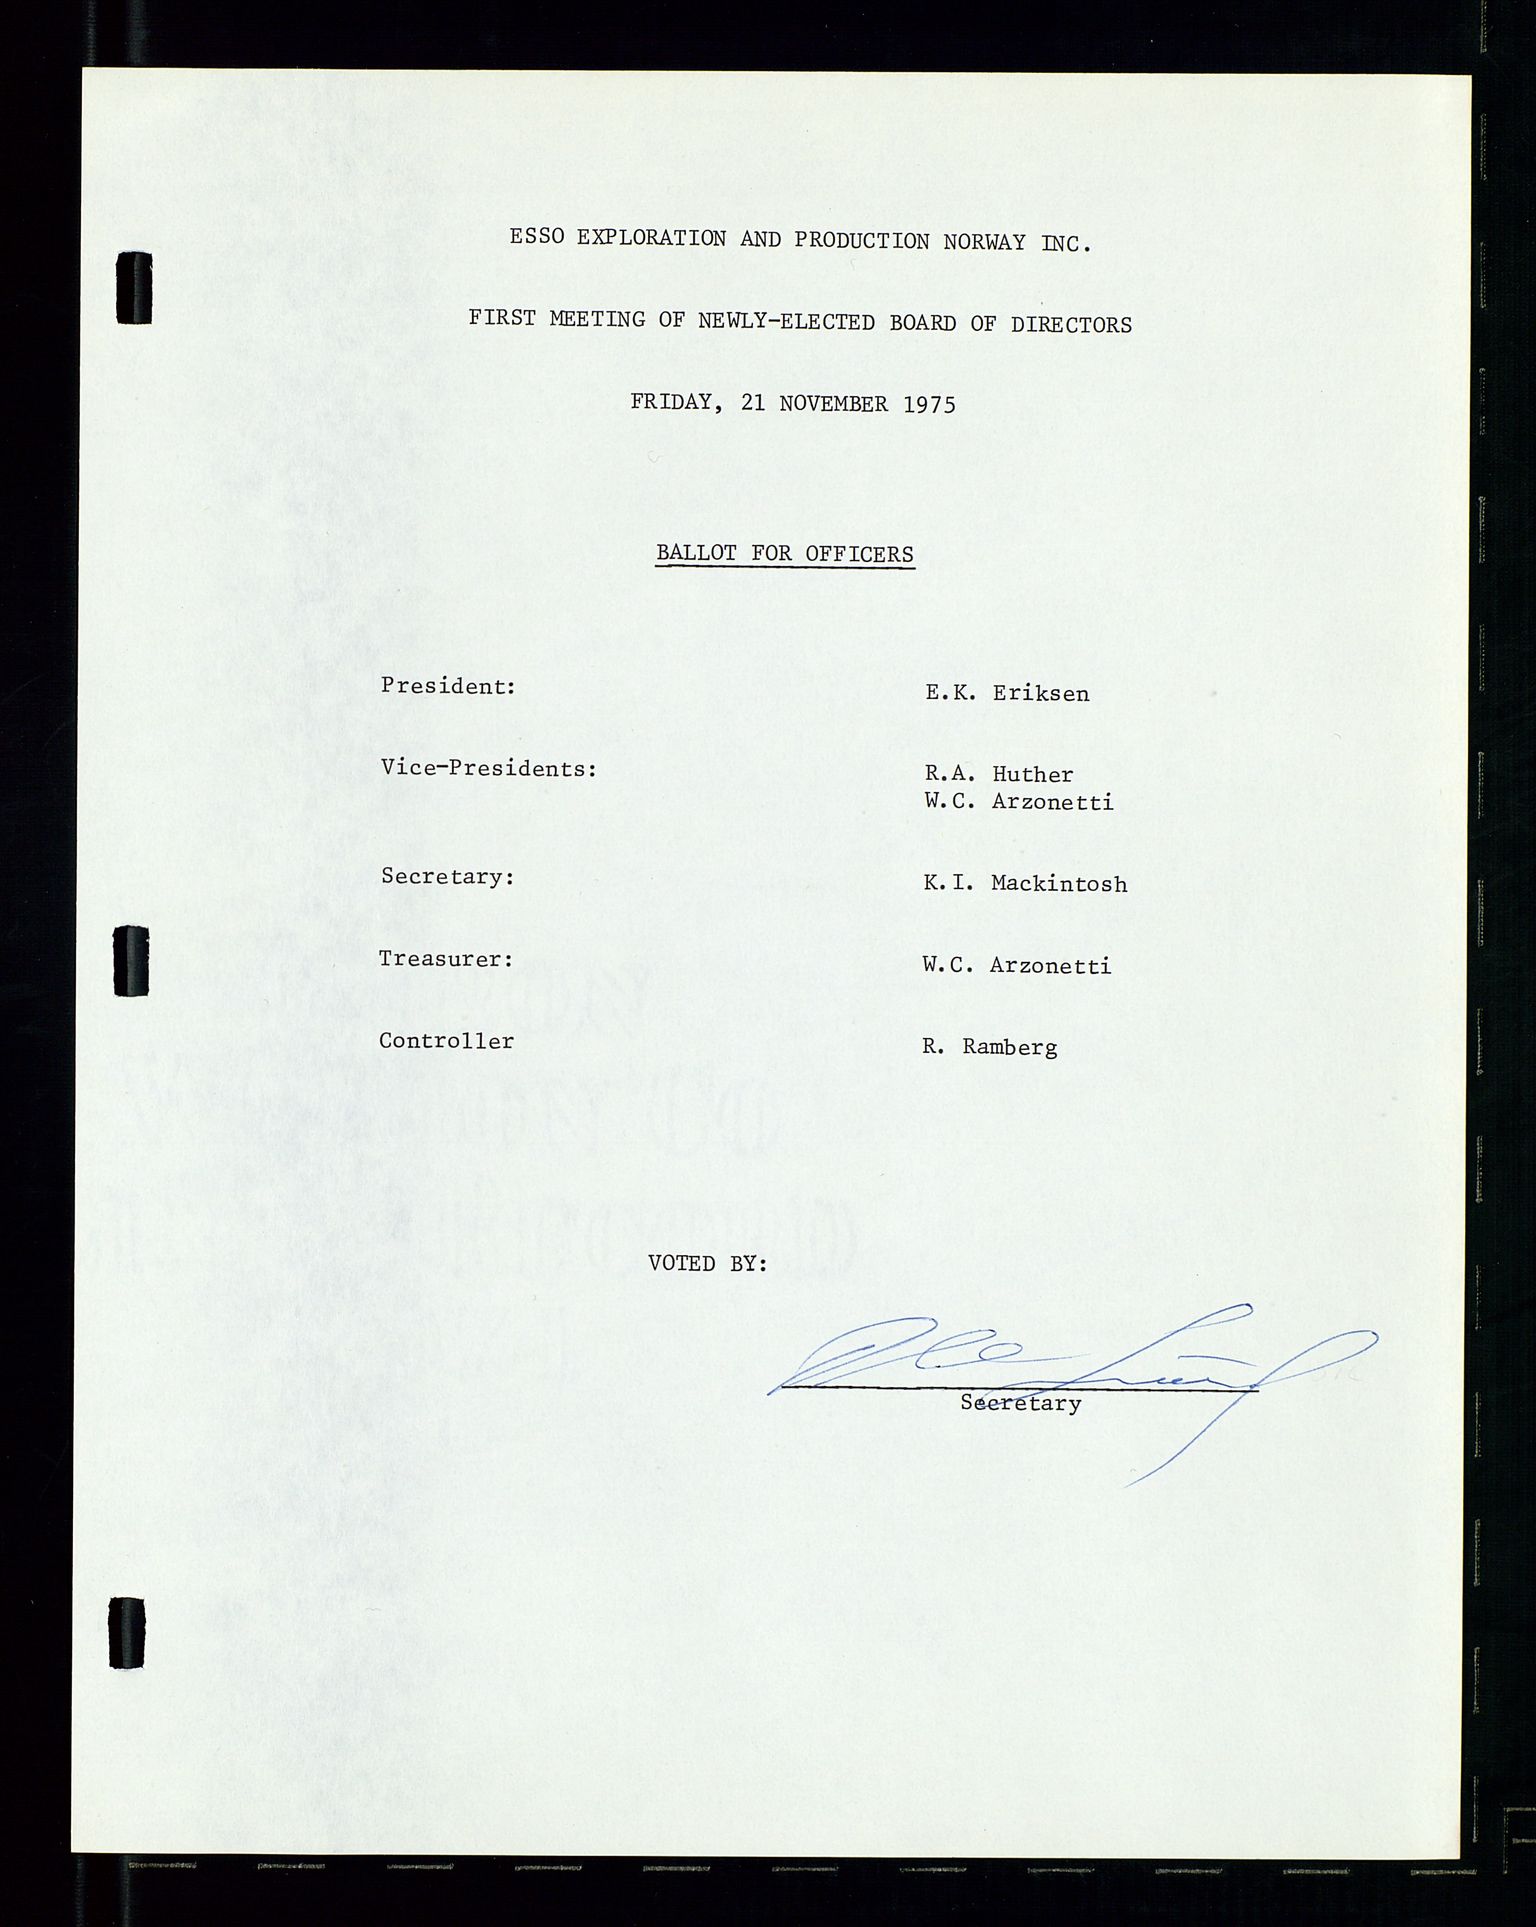 Pa 1512 - Esso Exploration and Production Norway Inc., SAST/A-101917/A/Aa/L0001/0002: Styredokumenter / Corporate records, Board meeting minutes, Agreements, Stocholder meetings, 1975-1979, s. 22